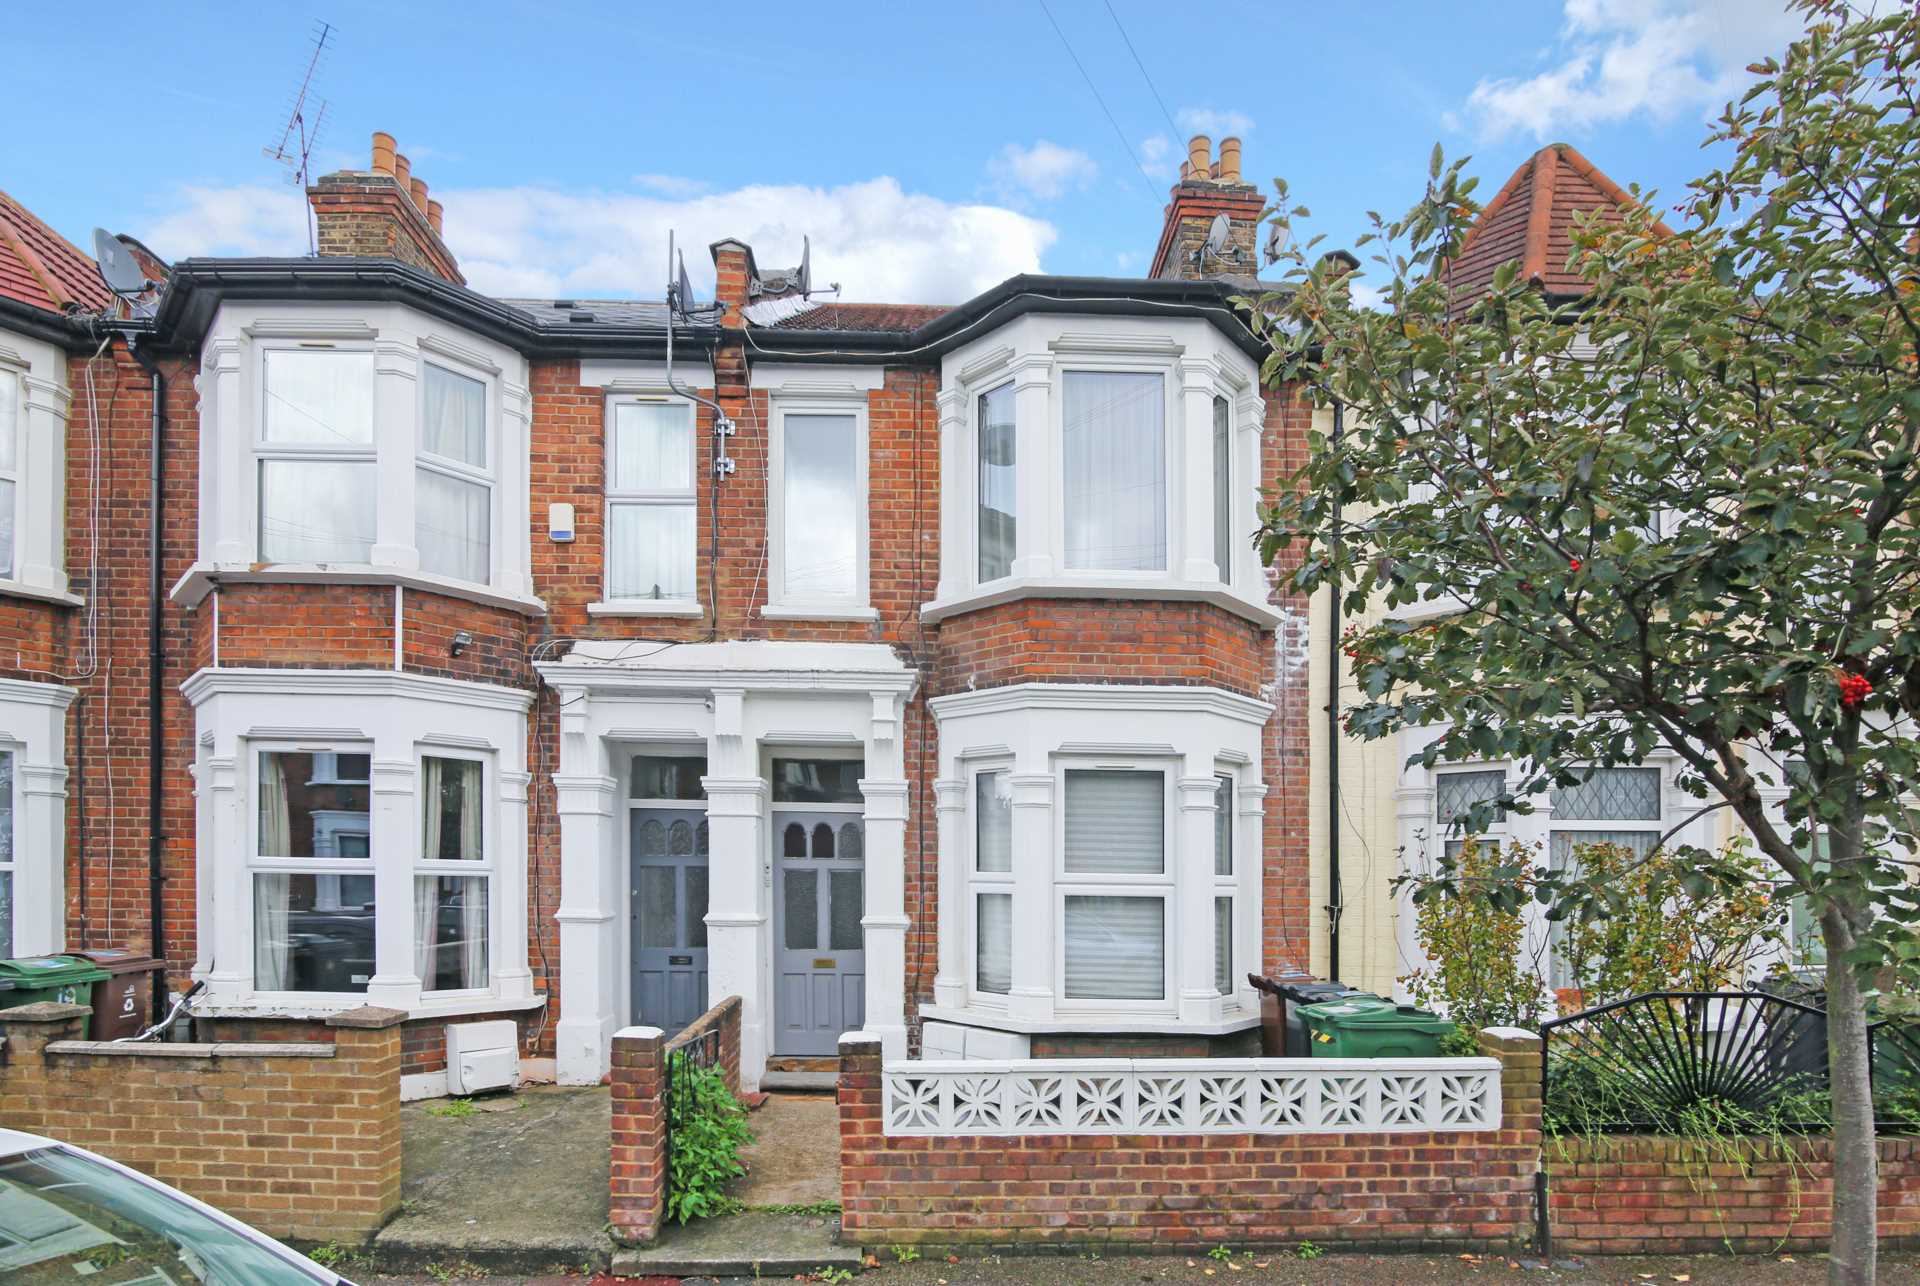 beautiful London flat in terraced house with white frame bay windows